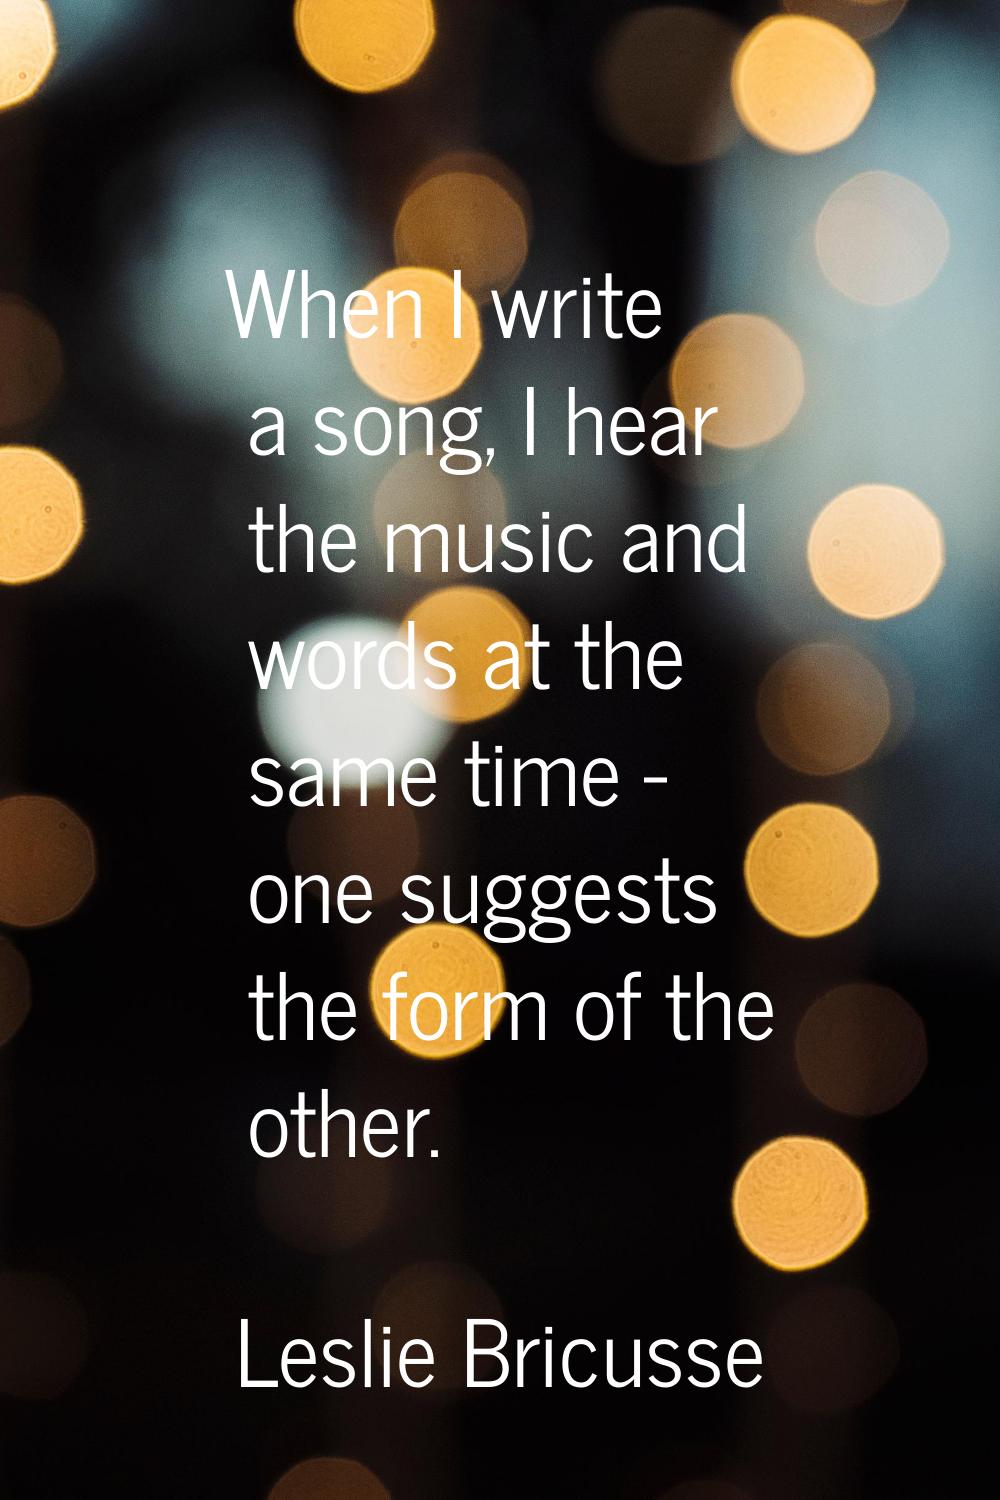 When I write a song, I hear the music and words at the same time - one suggests the form of the oth